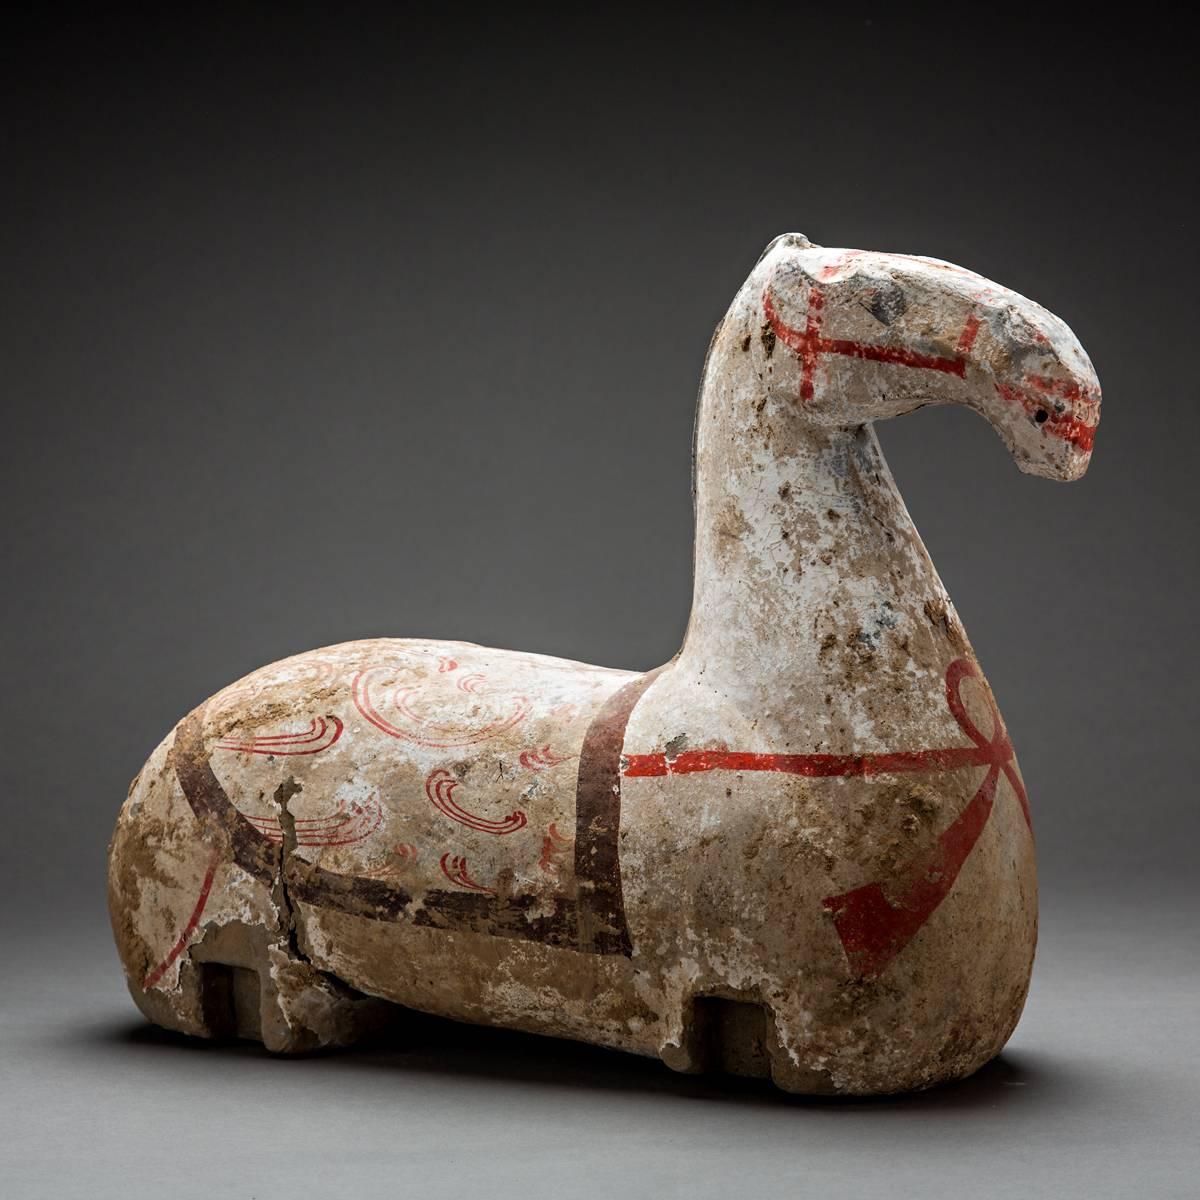 This powerfully modeled torso of a horse is painted with a full harness in red and white pigment. The saddle is outlined in blue paint and decorated with red circular designs. Staring eyes, bared teeth and flared nostrils, the horse’s expression is